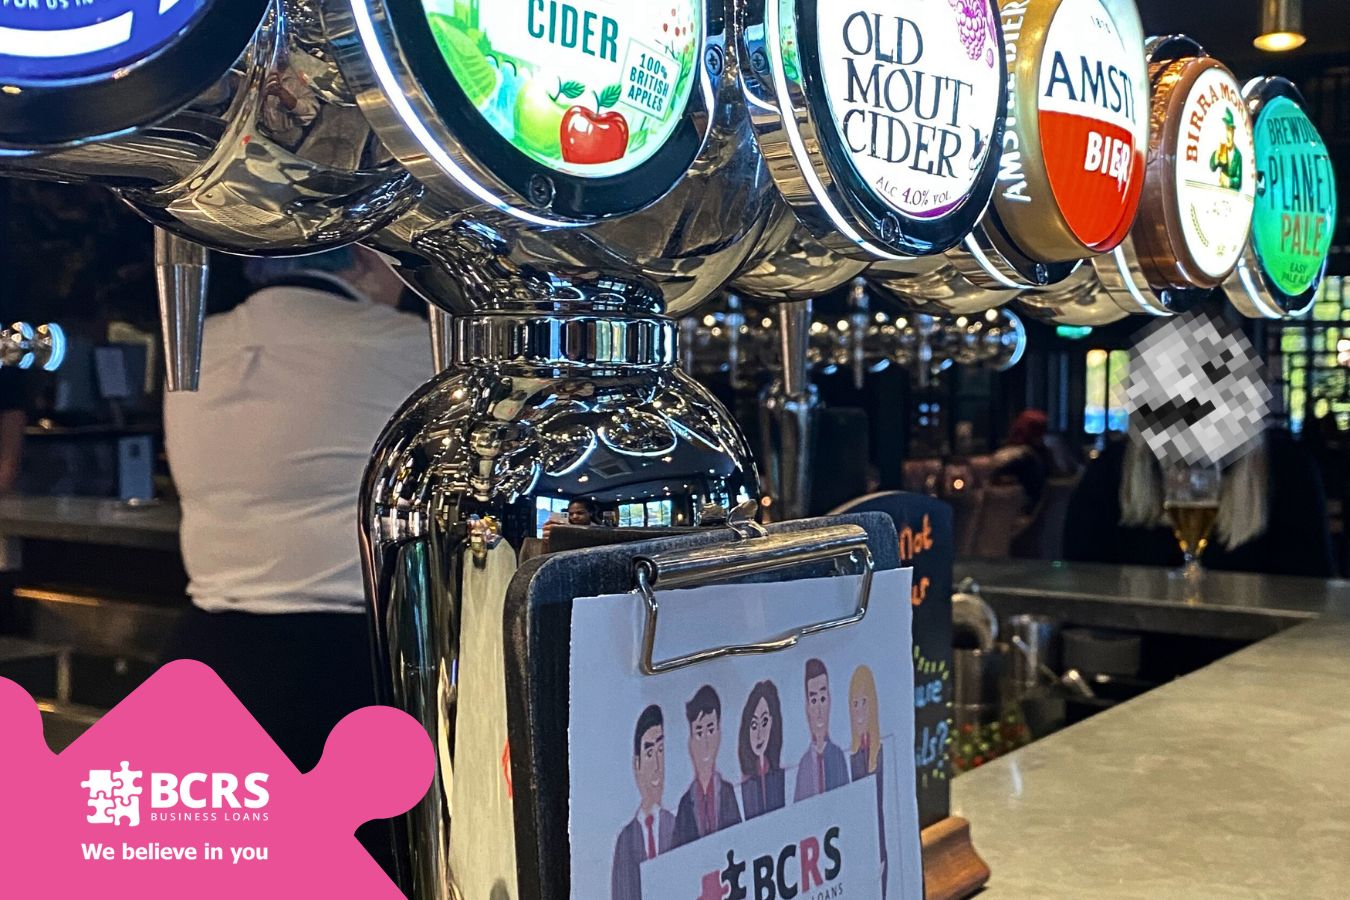 BCRS Business Loans ‘Pint After Work’ networking event comes to Shrewsbury